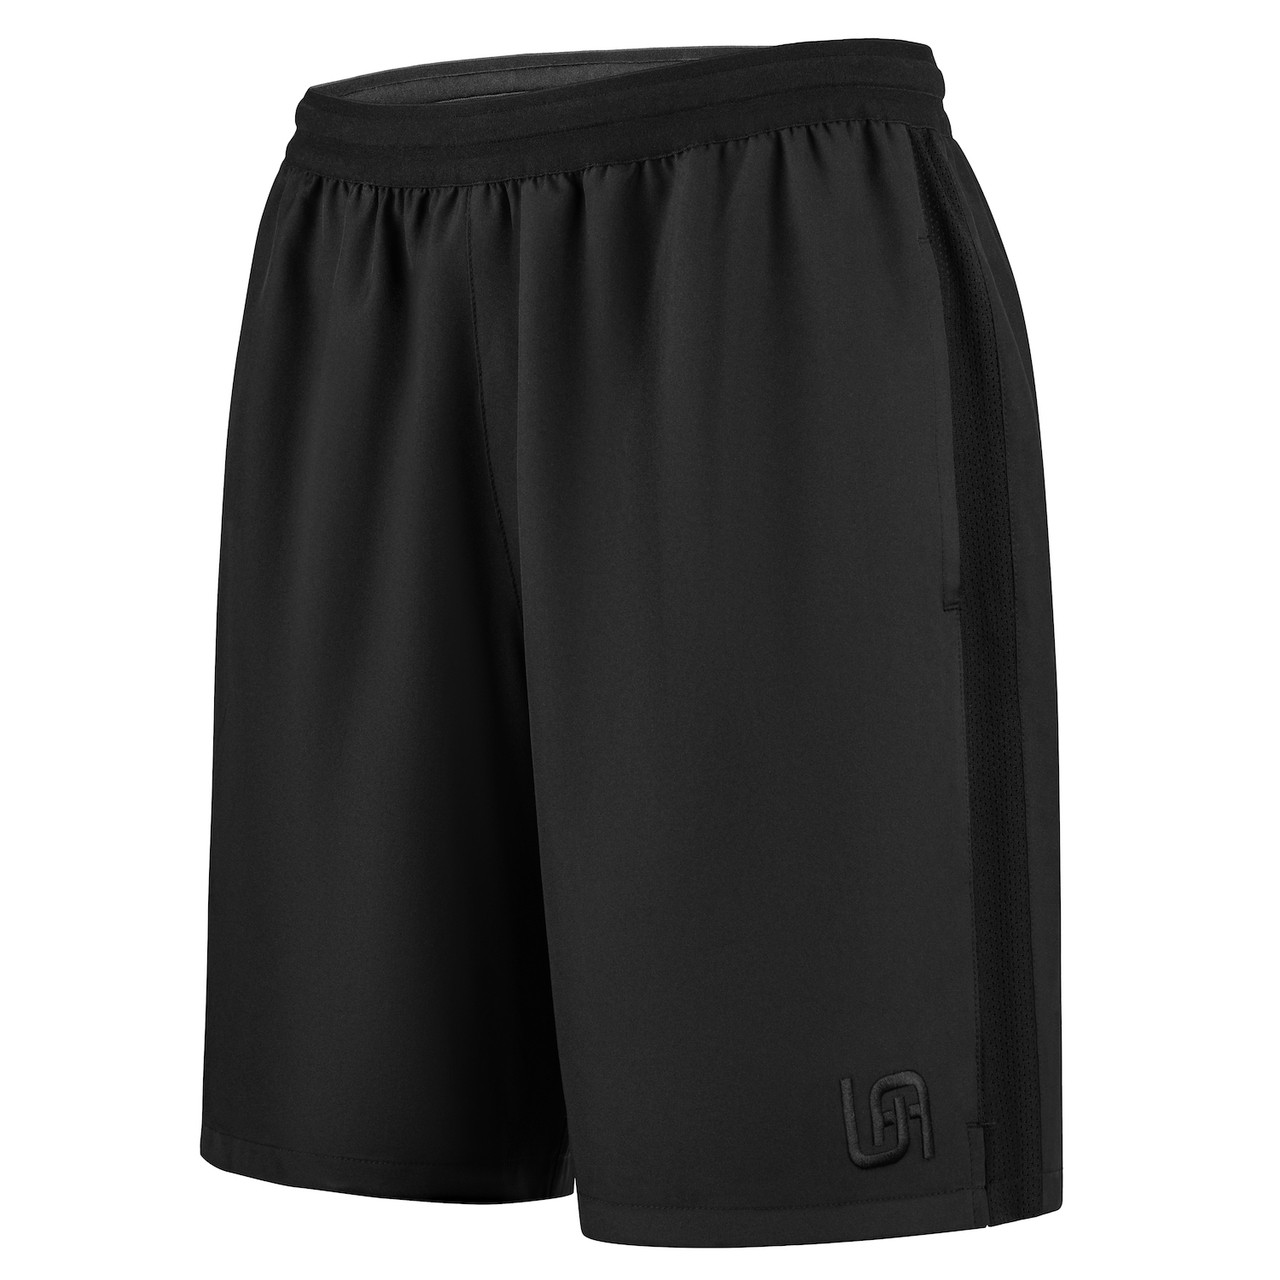 Motion Men's Athletic Shorts Quick Dry Lightweight Workout Shorts